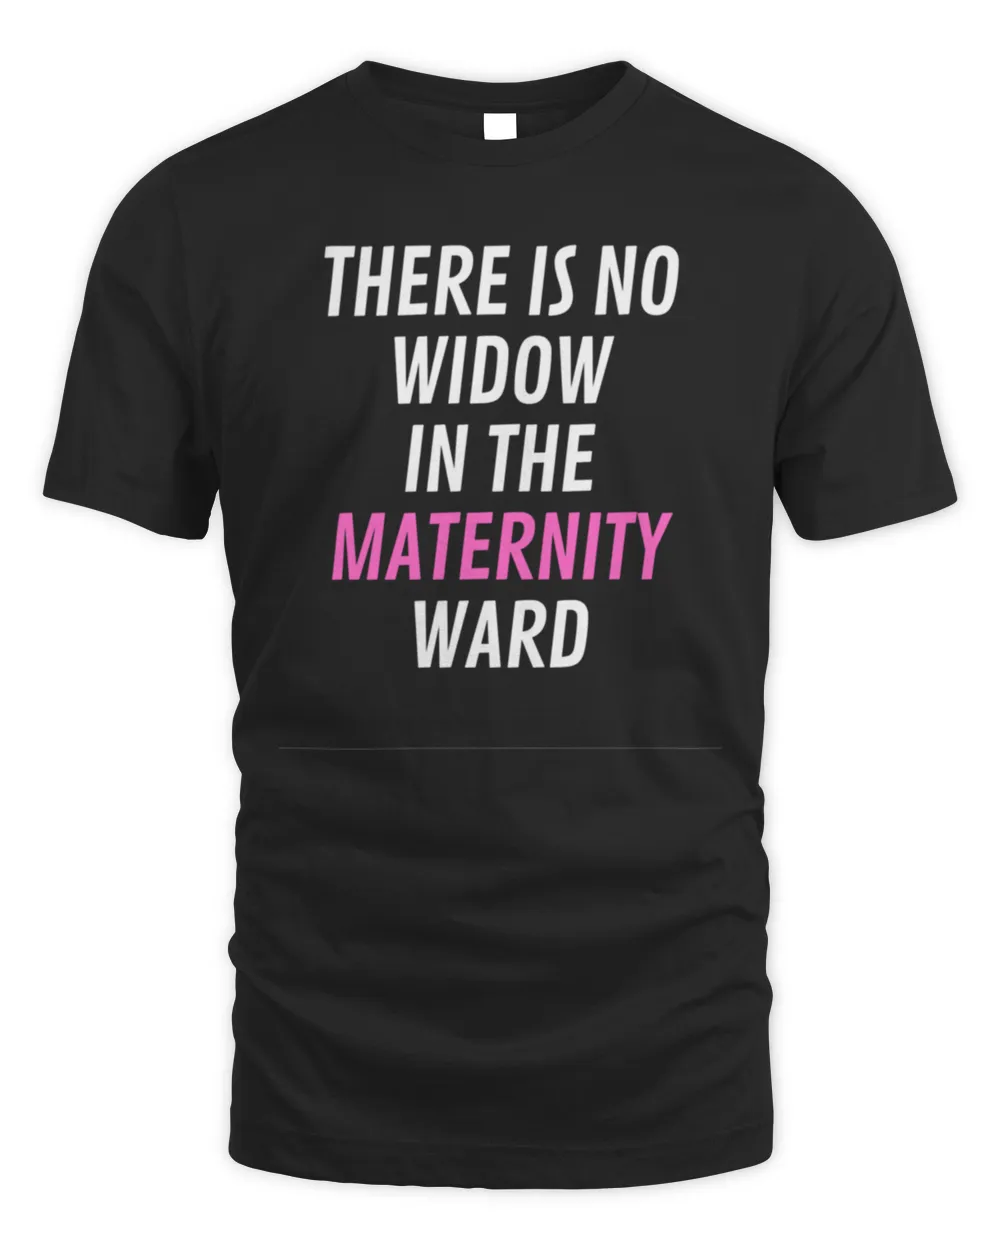 There is no widow in the maternity ward T-Shirt